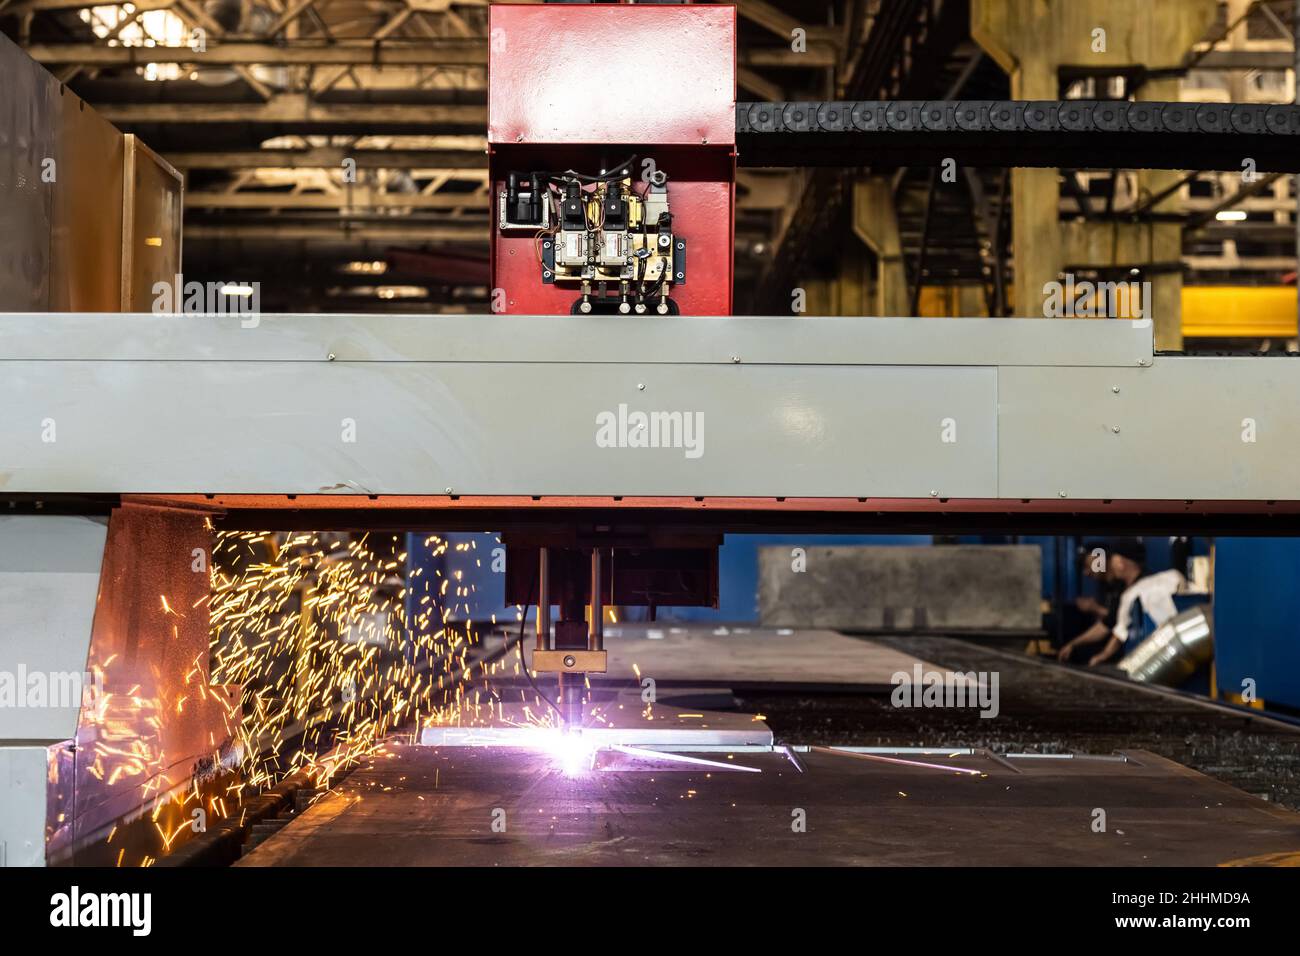 Plasma welding and metal cutting in industry. High-tech production processes at the plant Stock Photo